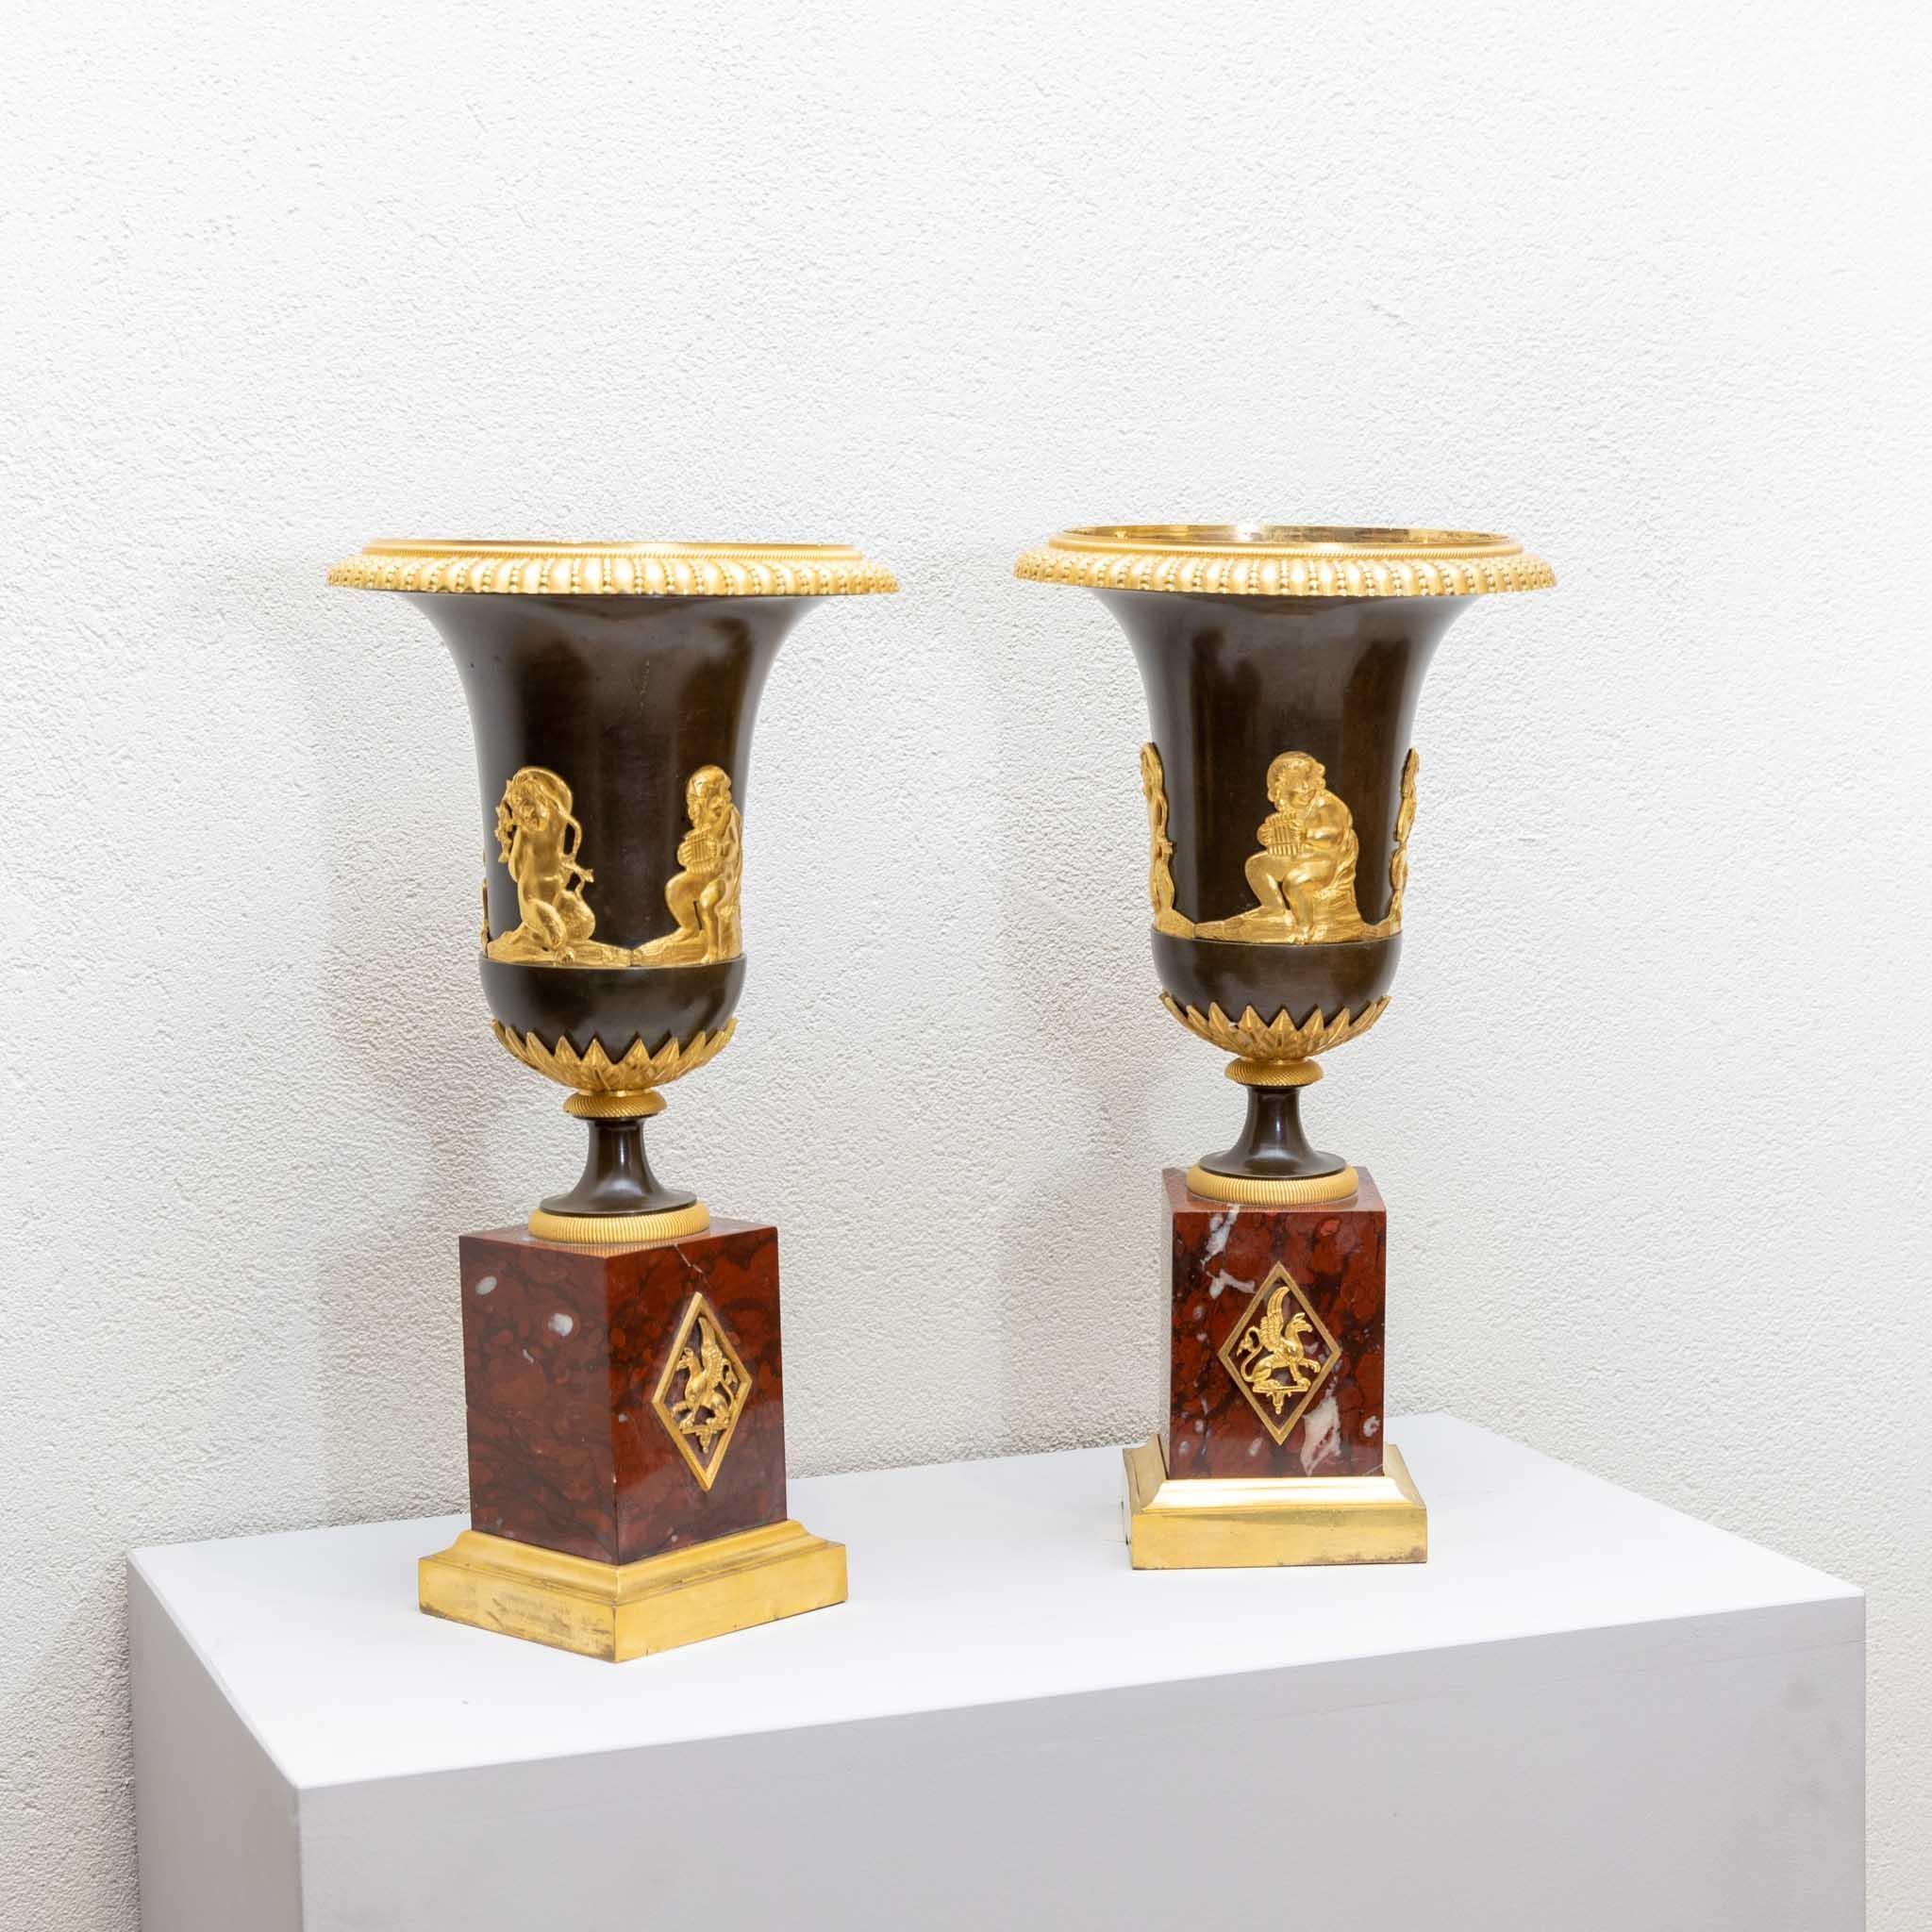 French Pair of Empire Vases, firegilt Bronze, Marble Bases, France, Early 19th Century For Sale